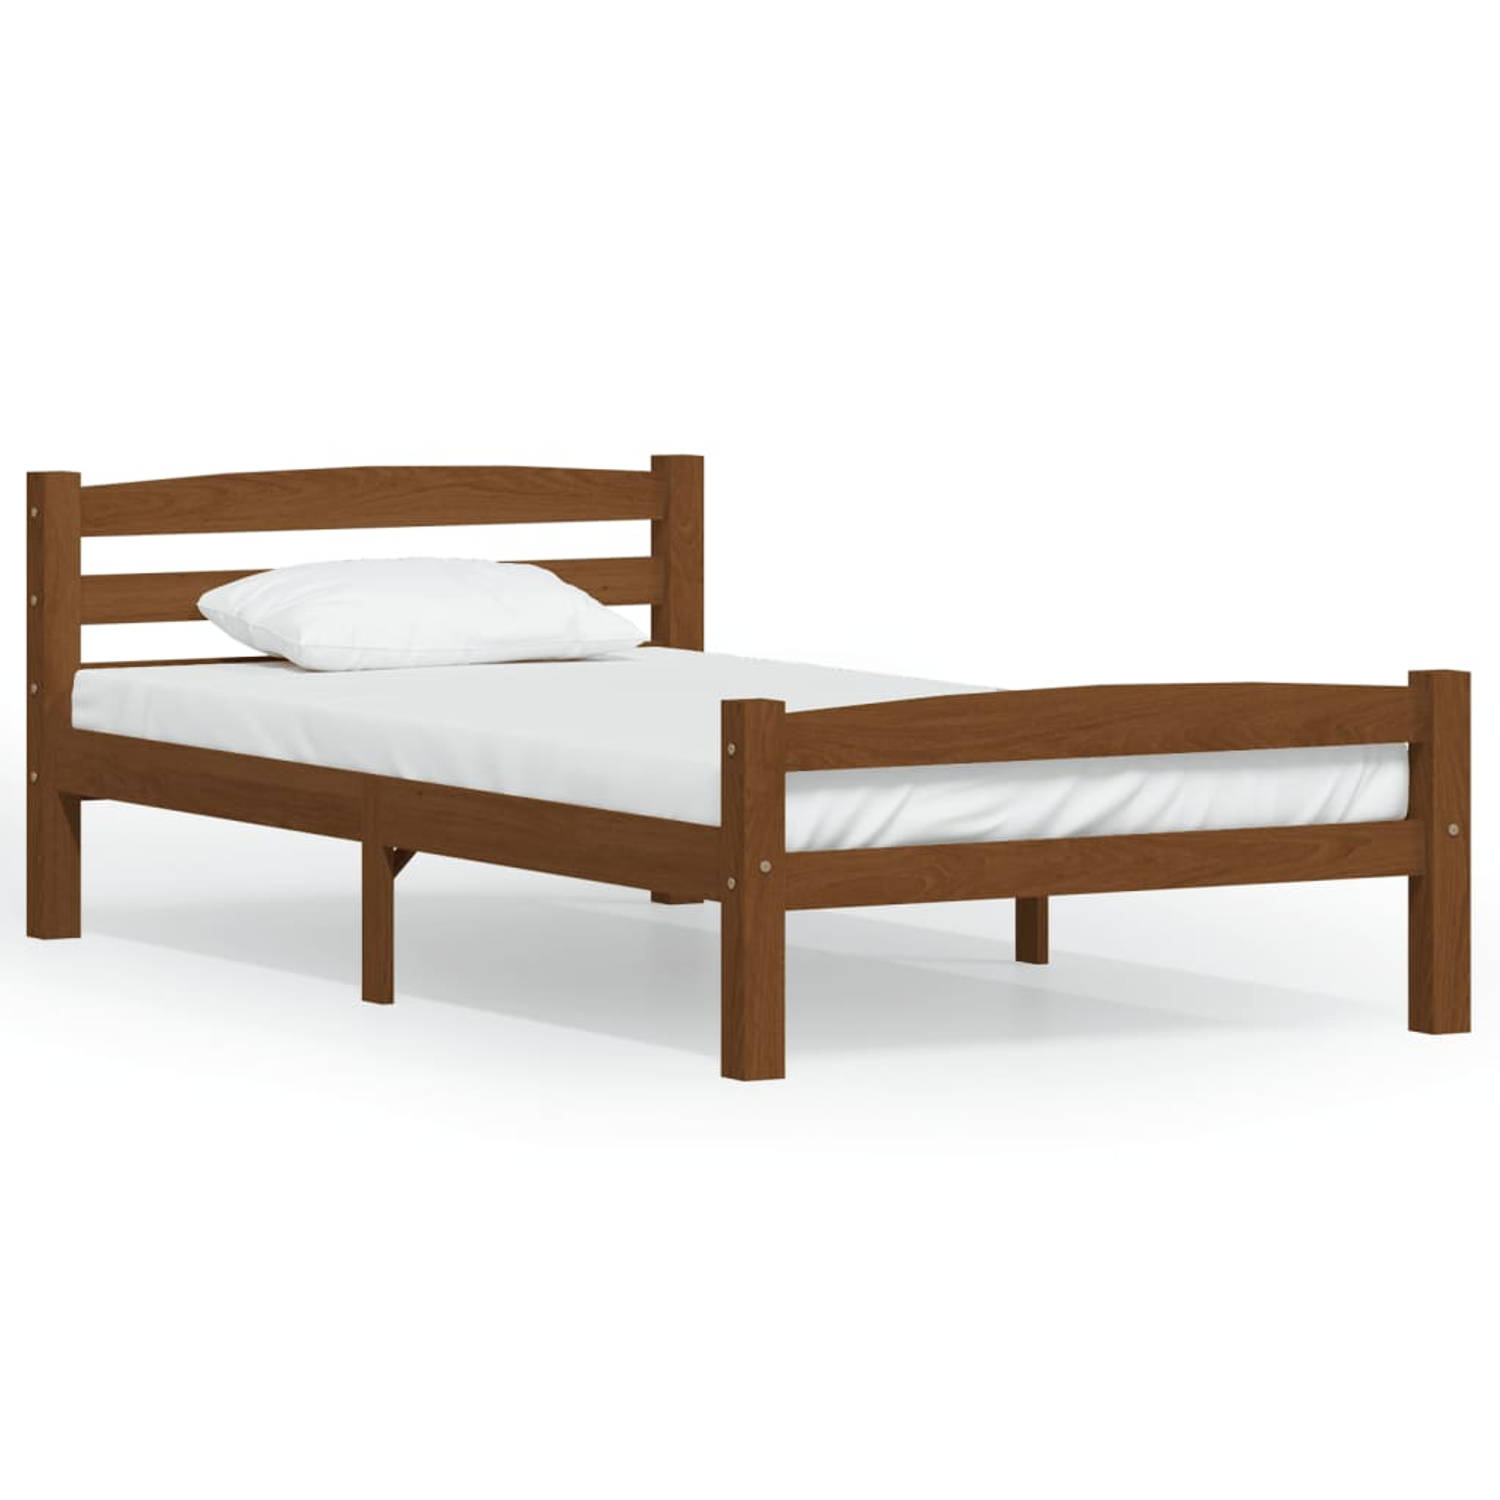 The Living Store Bedframe massief grenenhout honingbruin 90x200 cm - Bedframe - Bedframe - Bed Frame - Bed Frames - Bed - Bedden - 1-persoonsbed - 1-persoonsbedden - Eenpersoons Be